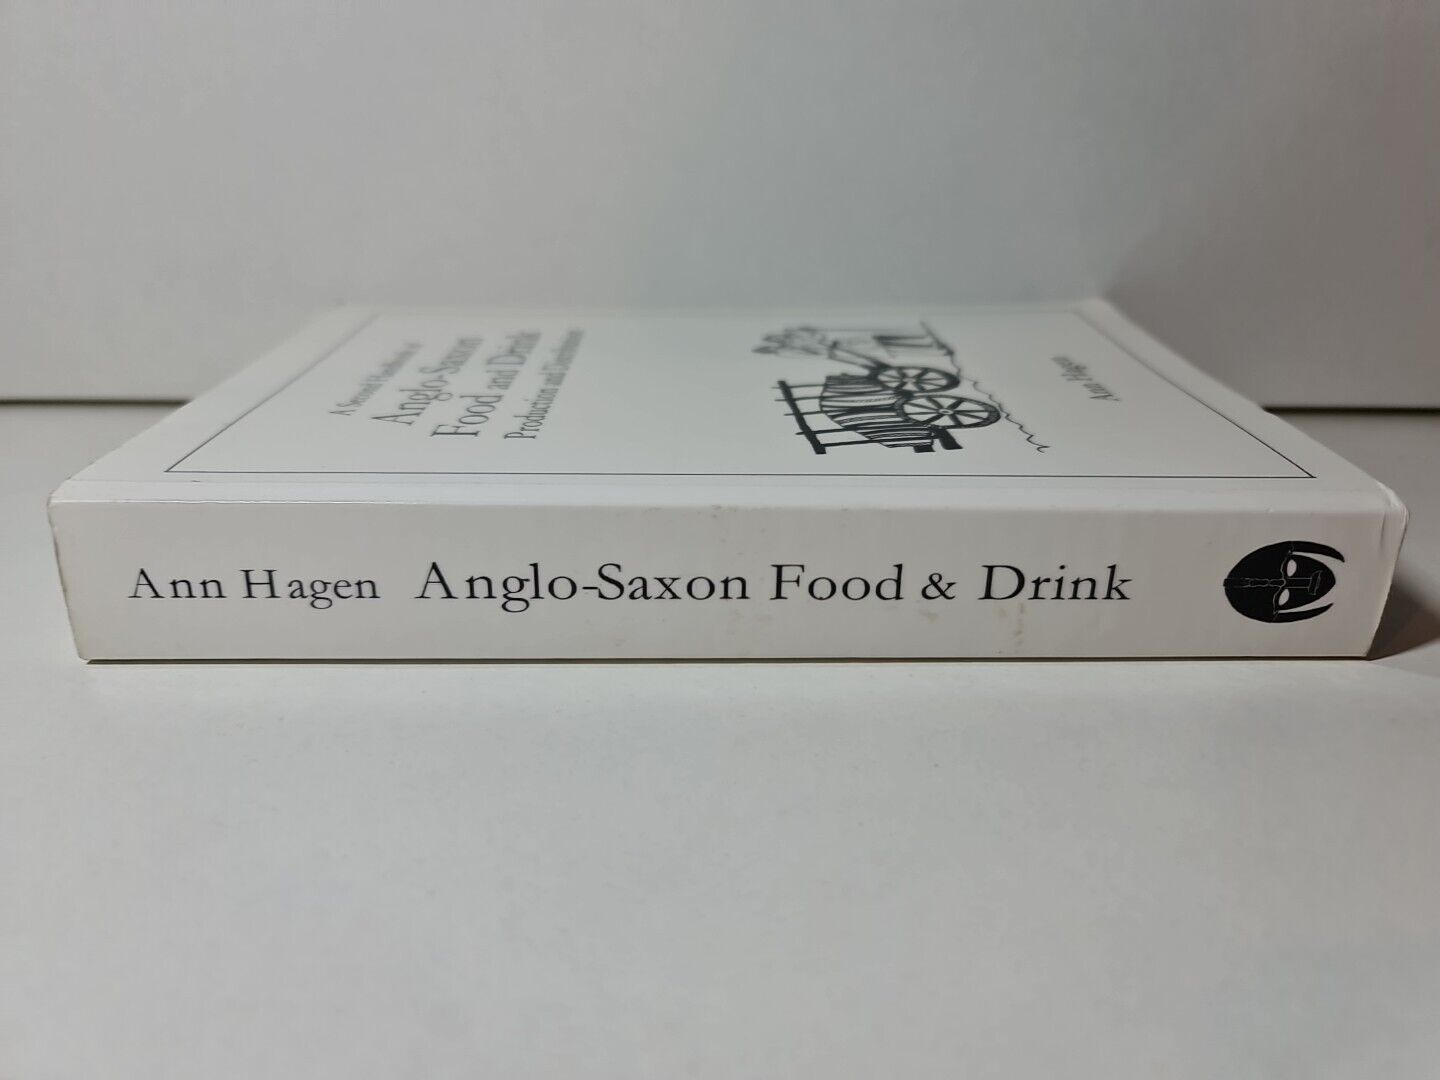 A Second Handbook of Anglo-Saxon Food & Drink: Production & Distribution (1999)